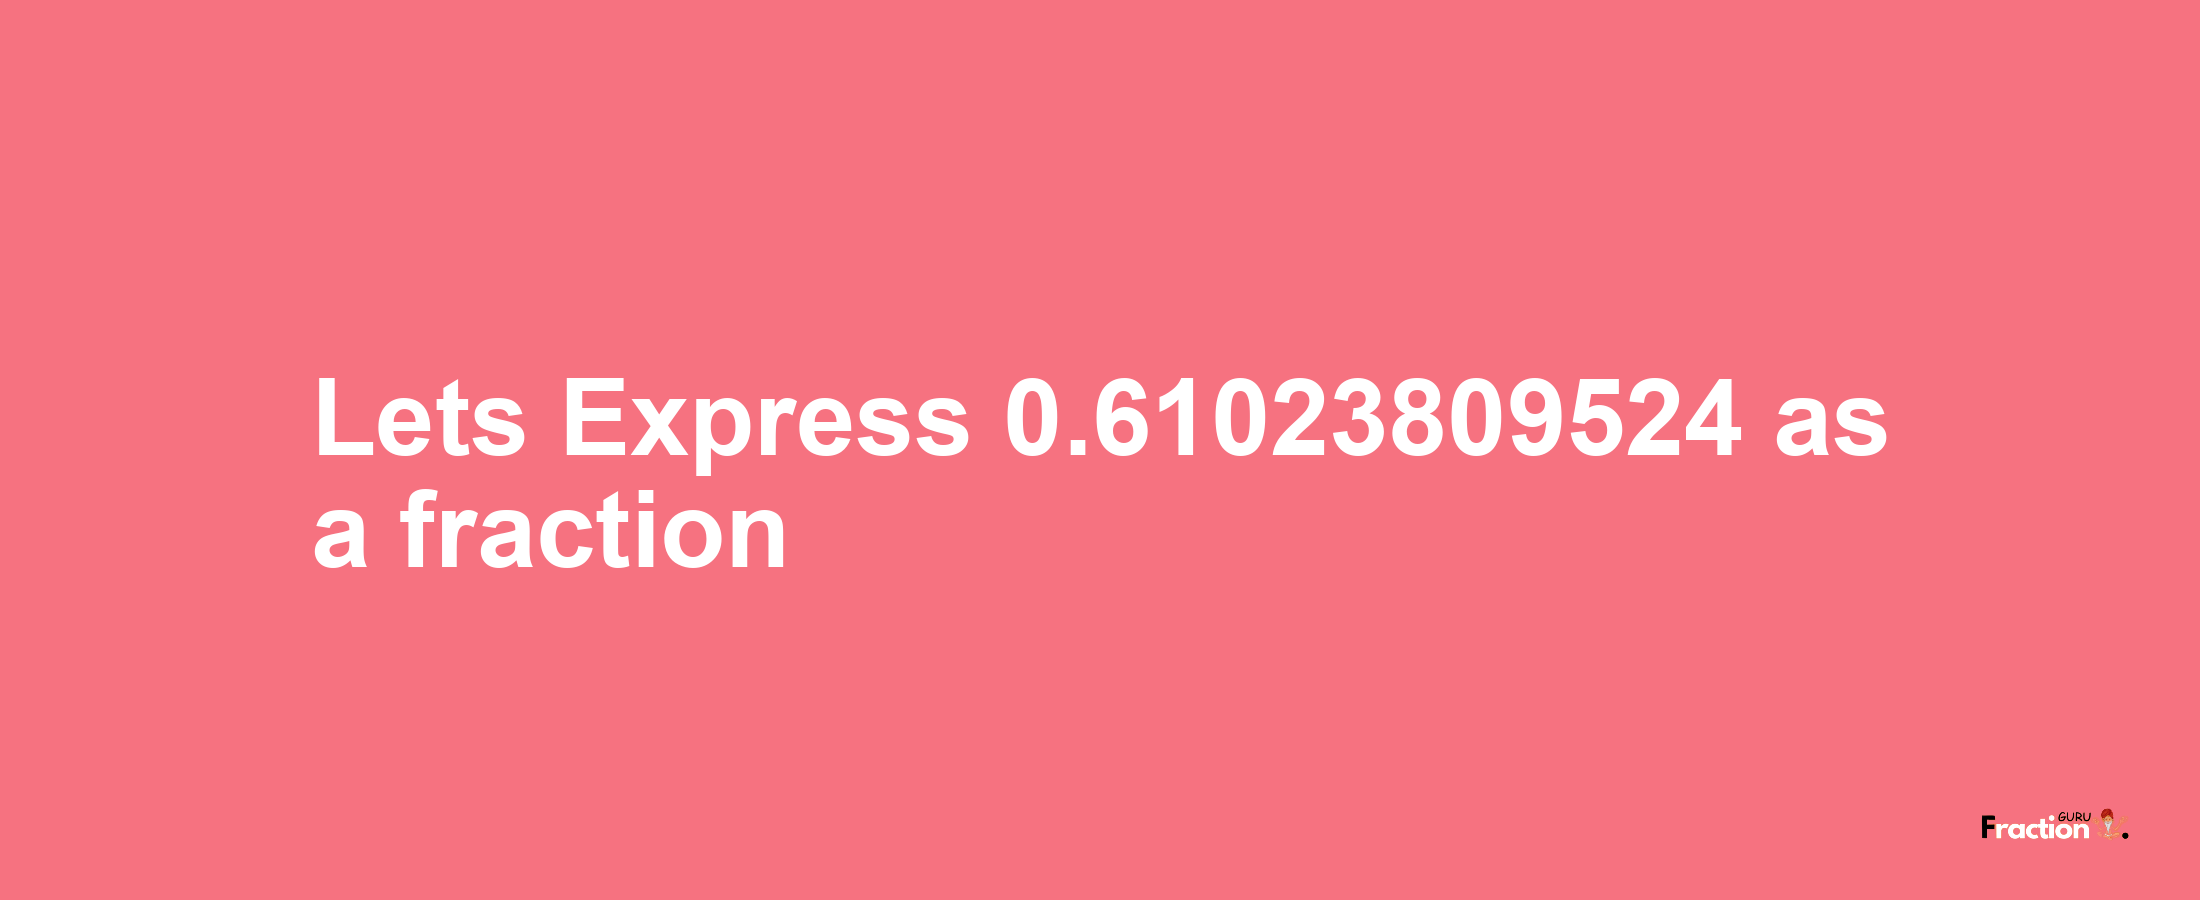 Lets Express 0.61023809524 as afraction